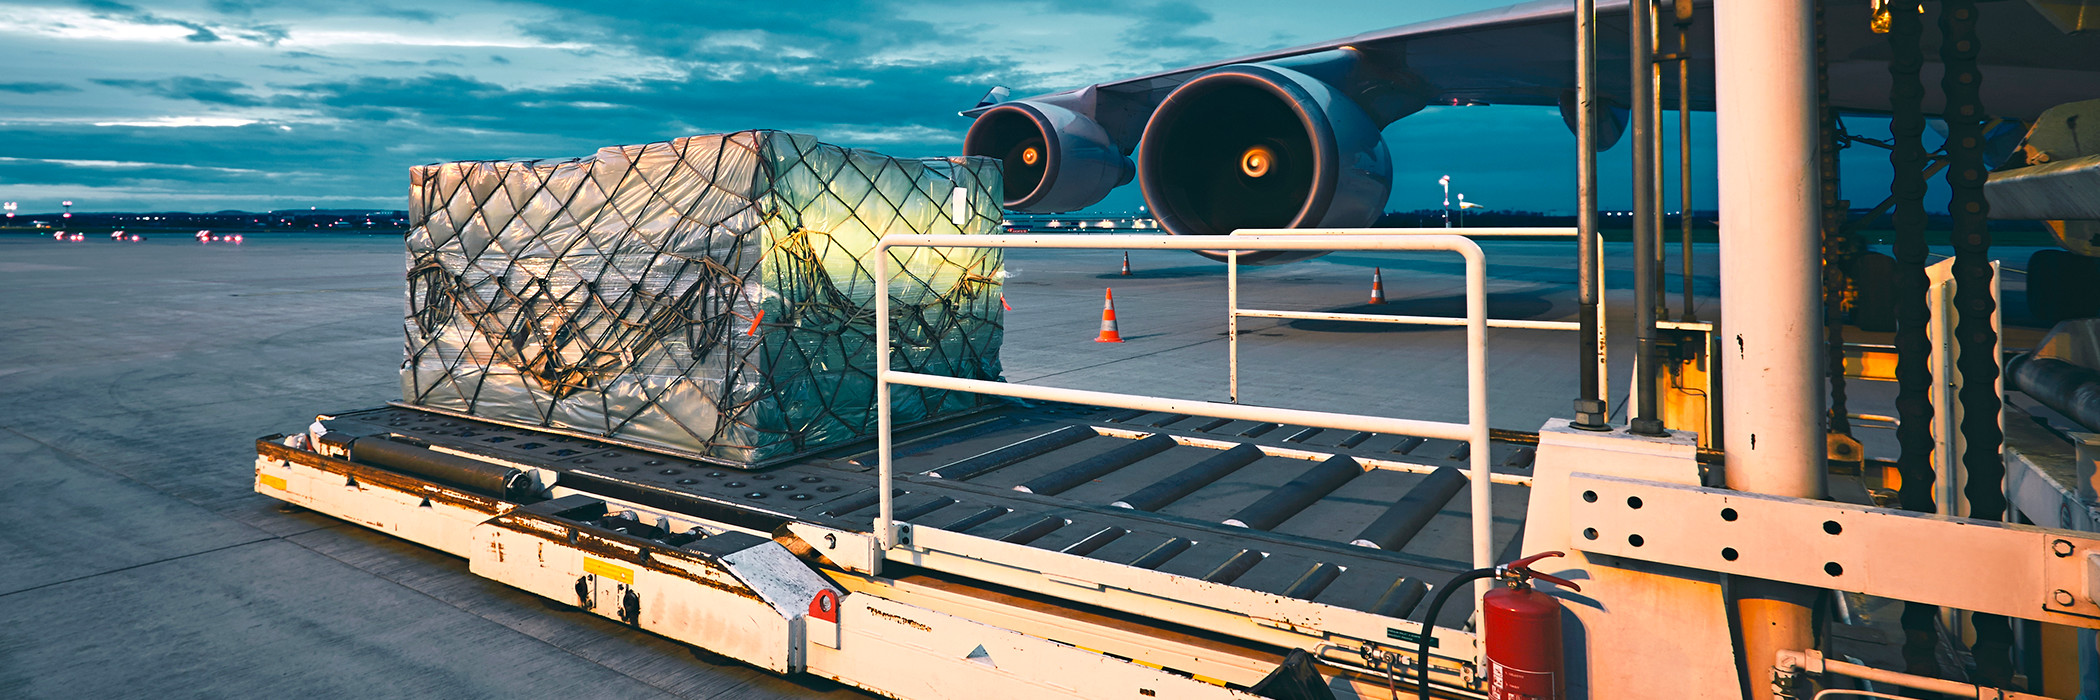 Cargo being loaded onto cargo plane